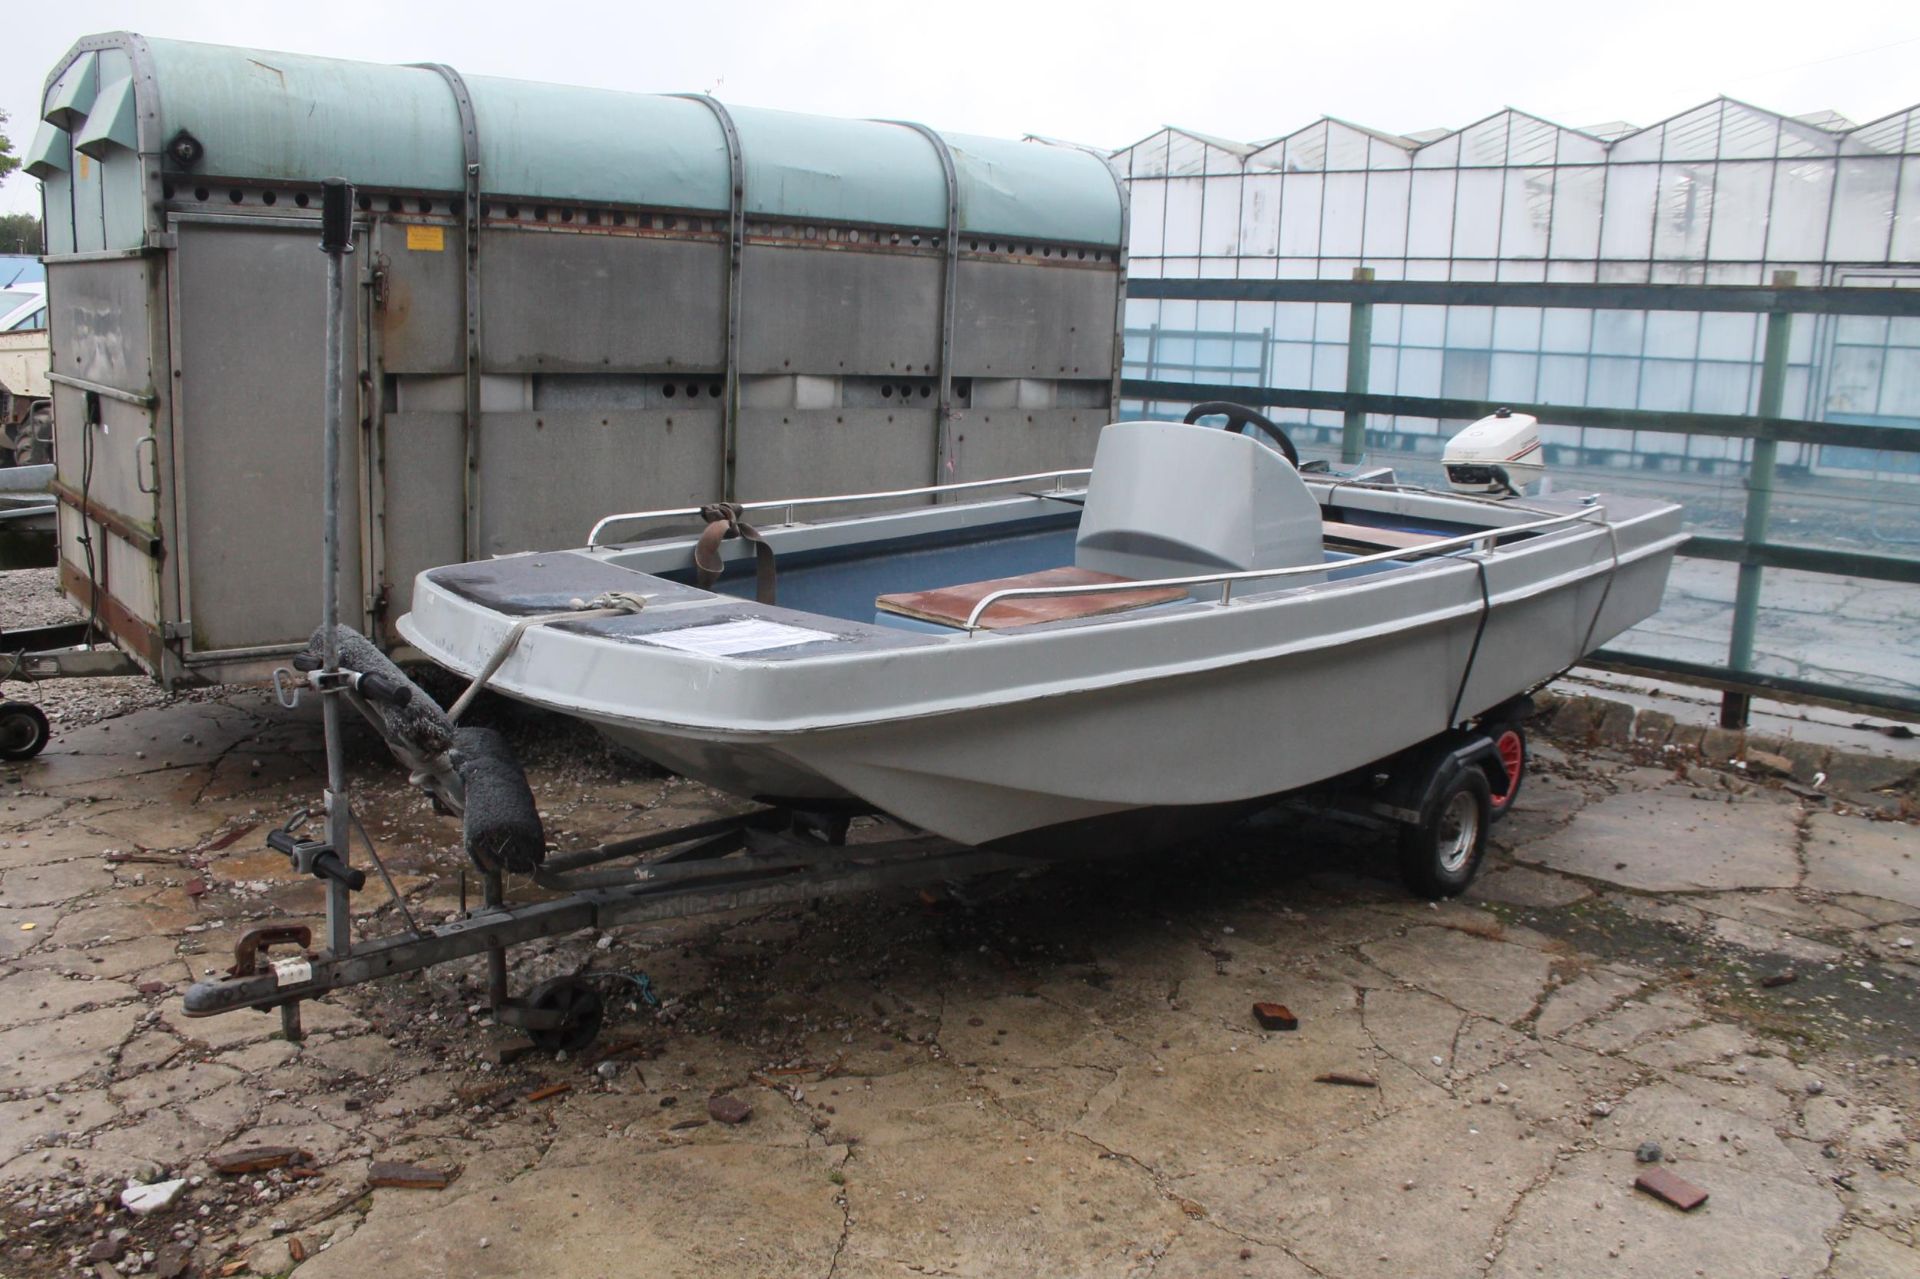 A 13 FOOT DORY CATHEDRAL FOAM FILLED HULL BOAT WITH JOHNSON SEA HORSE 4.5 OUTBOARD ENGINE, WHALE